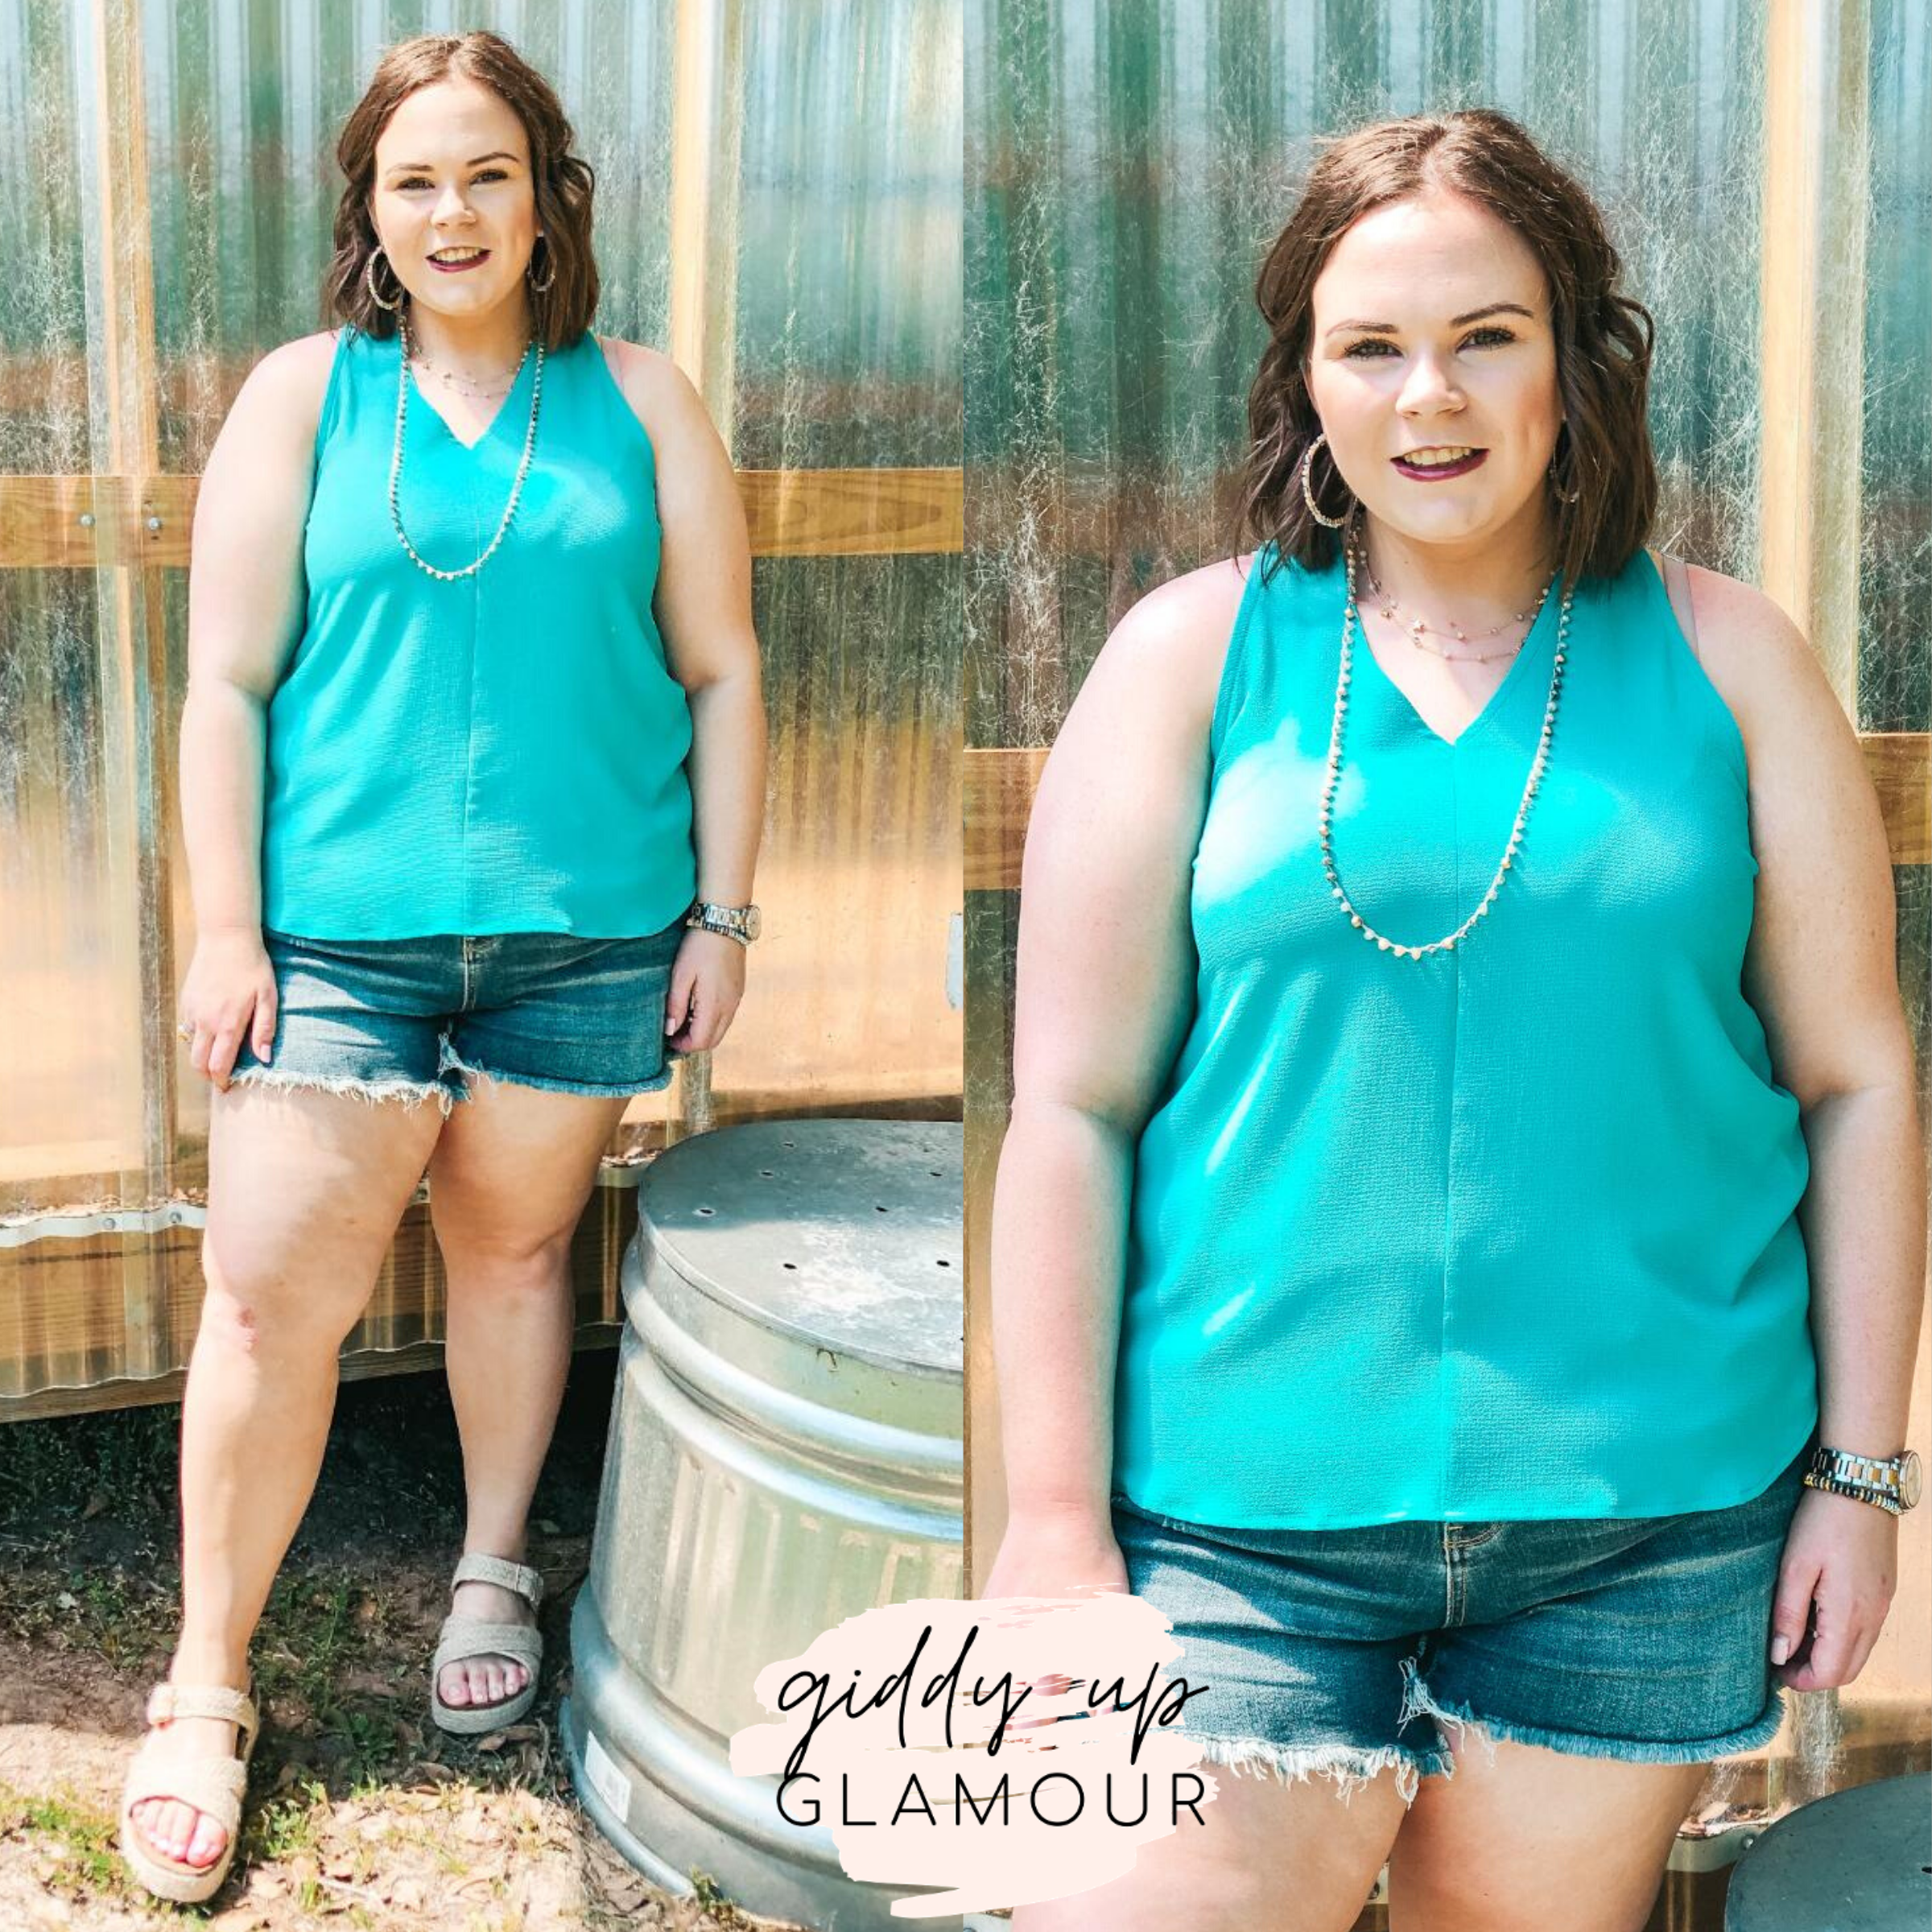 Last Chance Size Small & Medium | A Graceful Way V-Neck Tank Top with Ribbon in Turquoise - Giddy Up Glamour Boutique